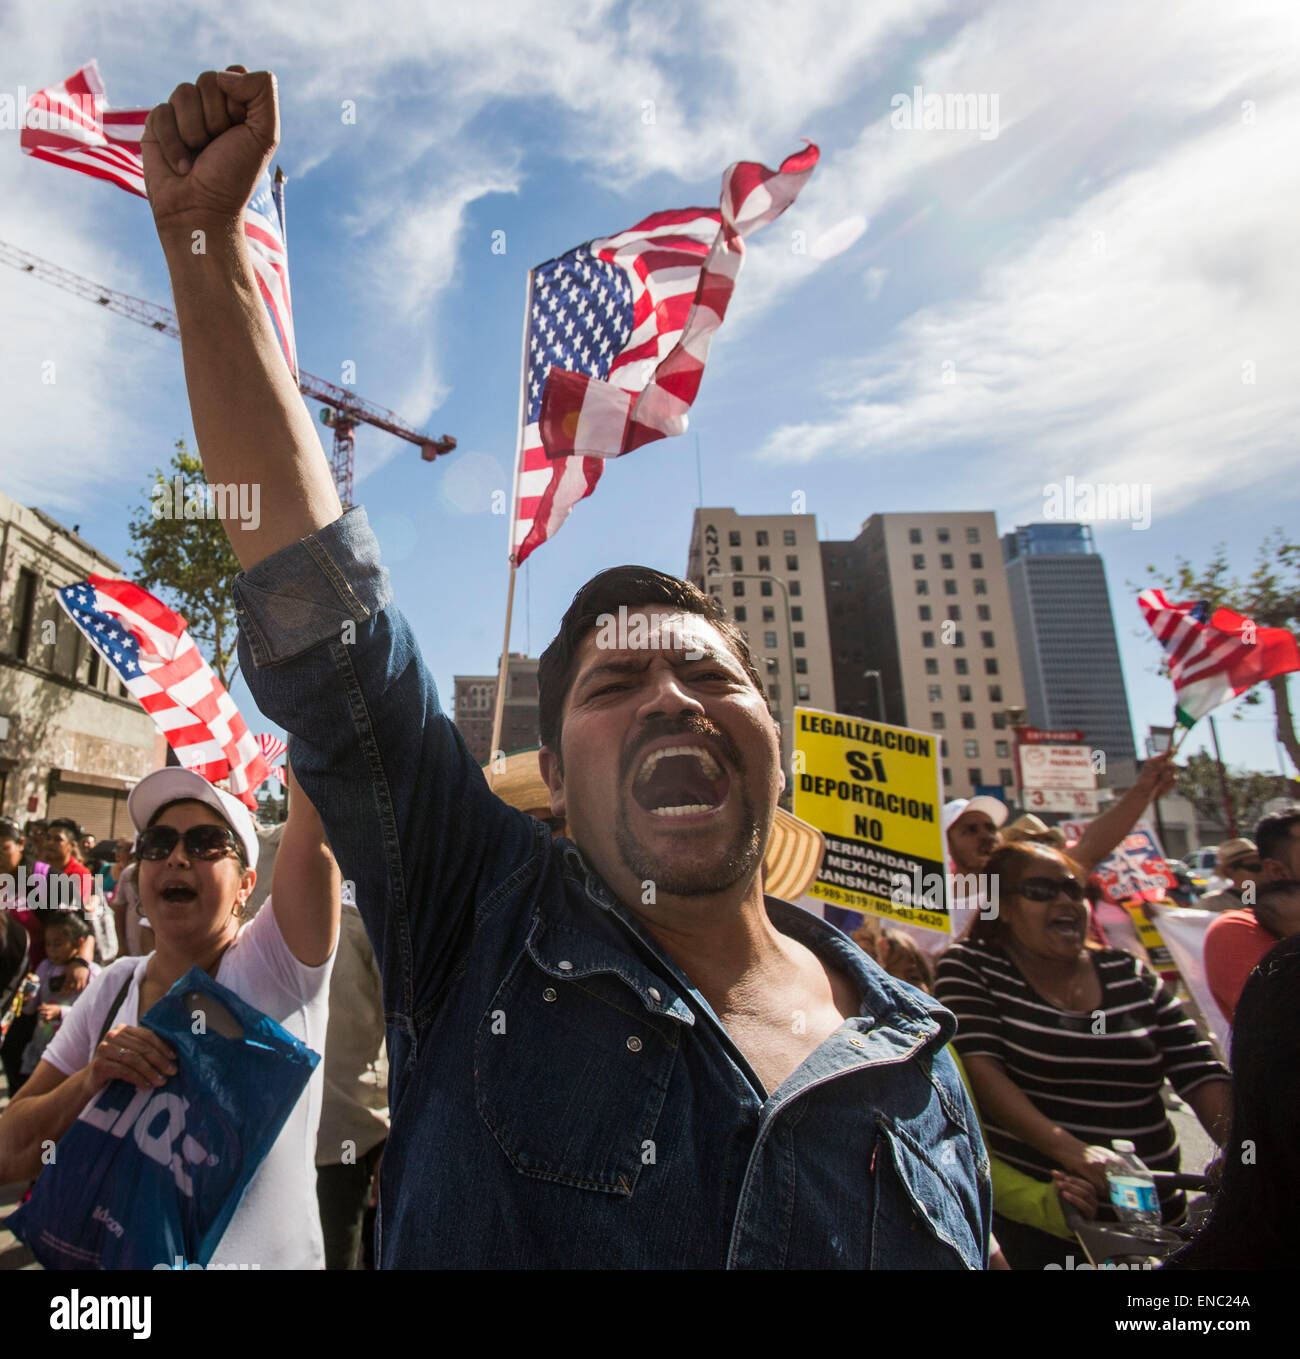 (150502)-- LOS ANGELES, May 2, 2015(Xinhua)-- Protesters shouting slogans march toward downtown Los Angeles as thousands of people participating in the annual May Day march downtown Los Angeles May 1, 2015. Labor organizations and immigration groups held the annual celebration to push for higher wages, immigration reform and justice for minorities. (Xinhua/Zhao Hanrong)(azp) Stock Photo